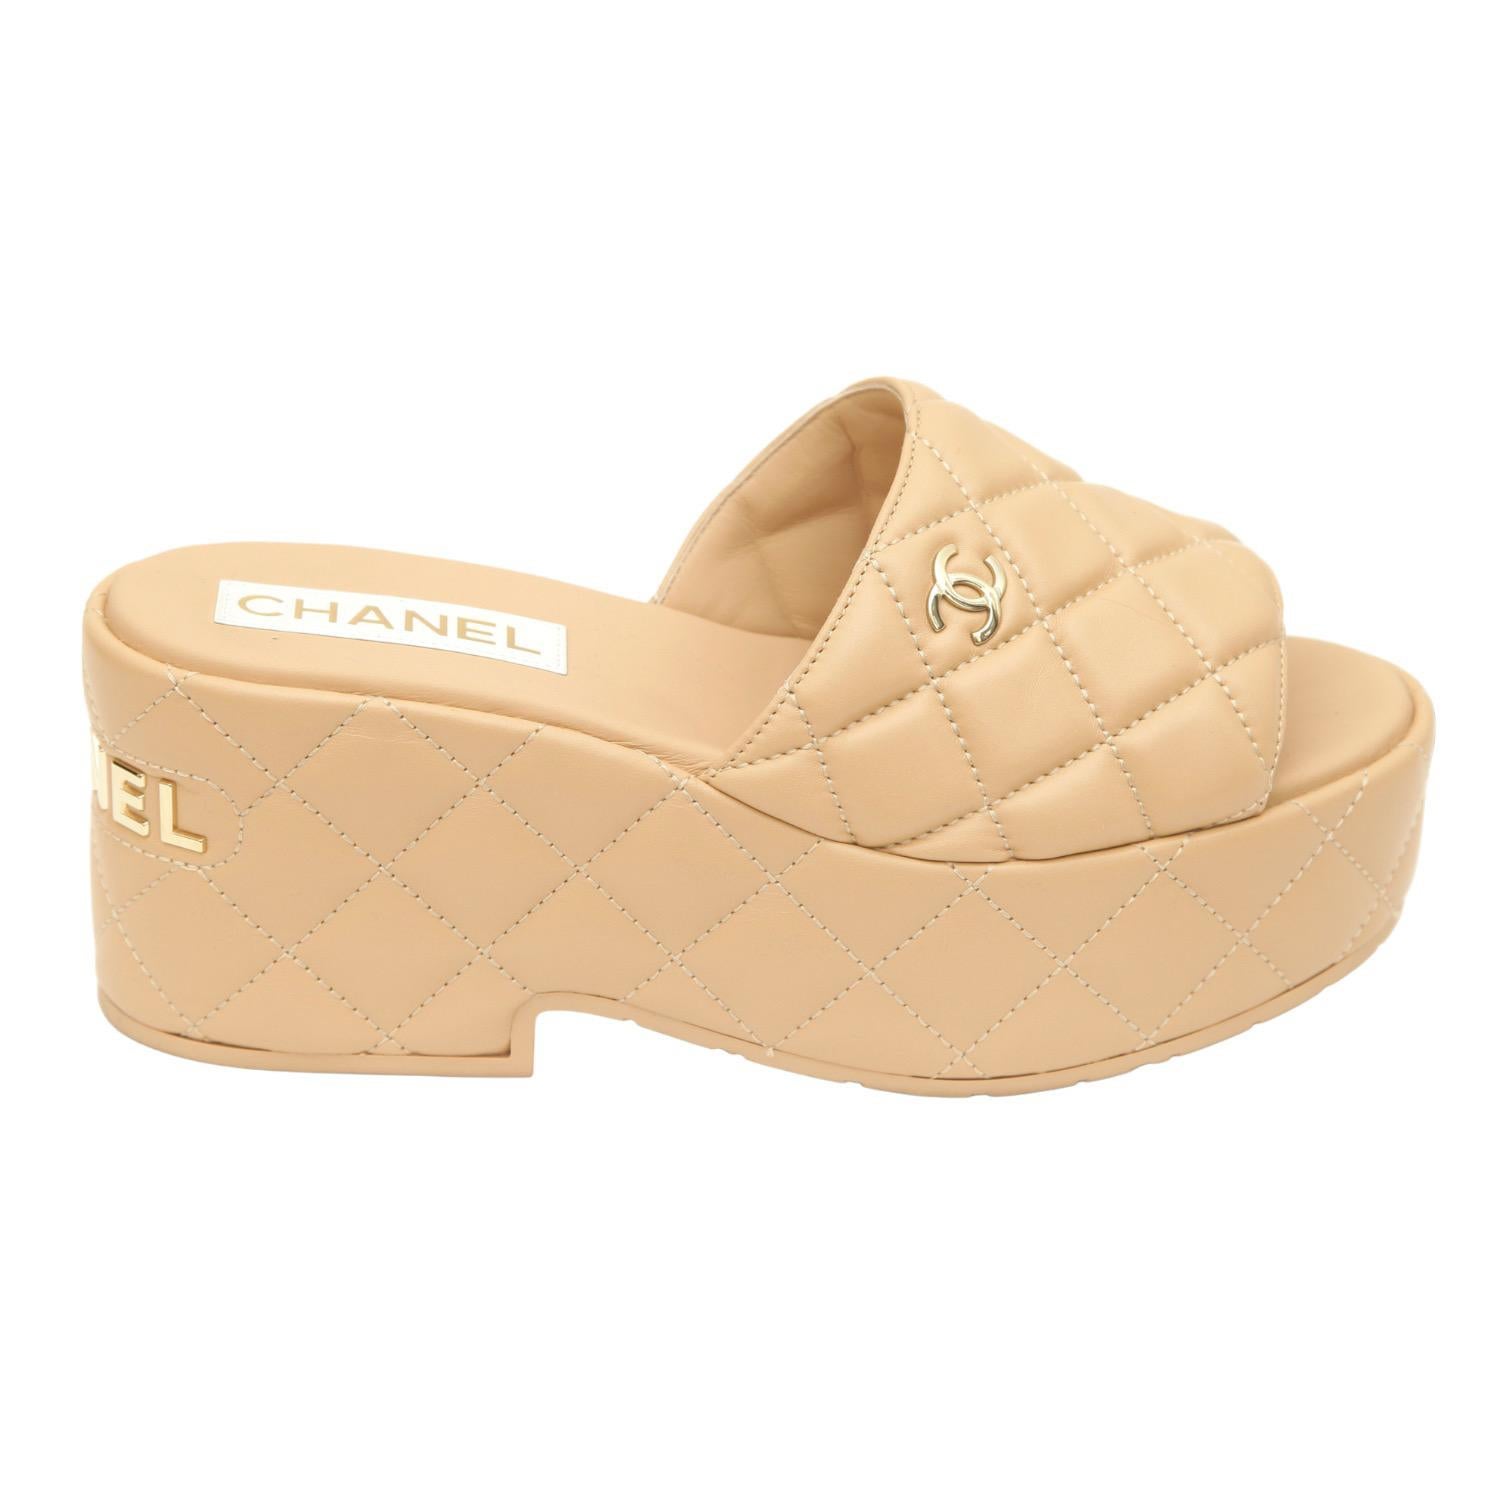 GUARANTEED AUTHENTIC CHANEL 2023 BEIGE QUILTED LEATHER MULES

Retail excluding sales taxes $1,300


Details:
- Beige quilted leather uppers.
- Gold-tone CC logo at vamp.
- Platform, wedge heels.
- Slip on.
- Leather insoles and rubber soles.
- Comes